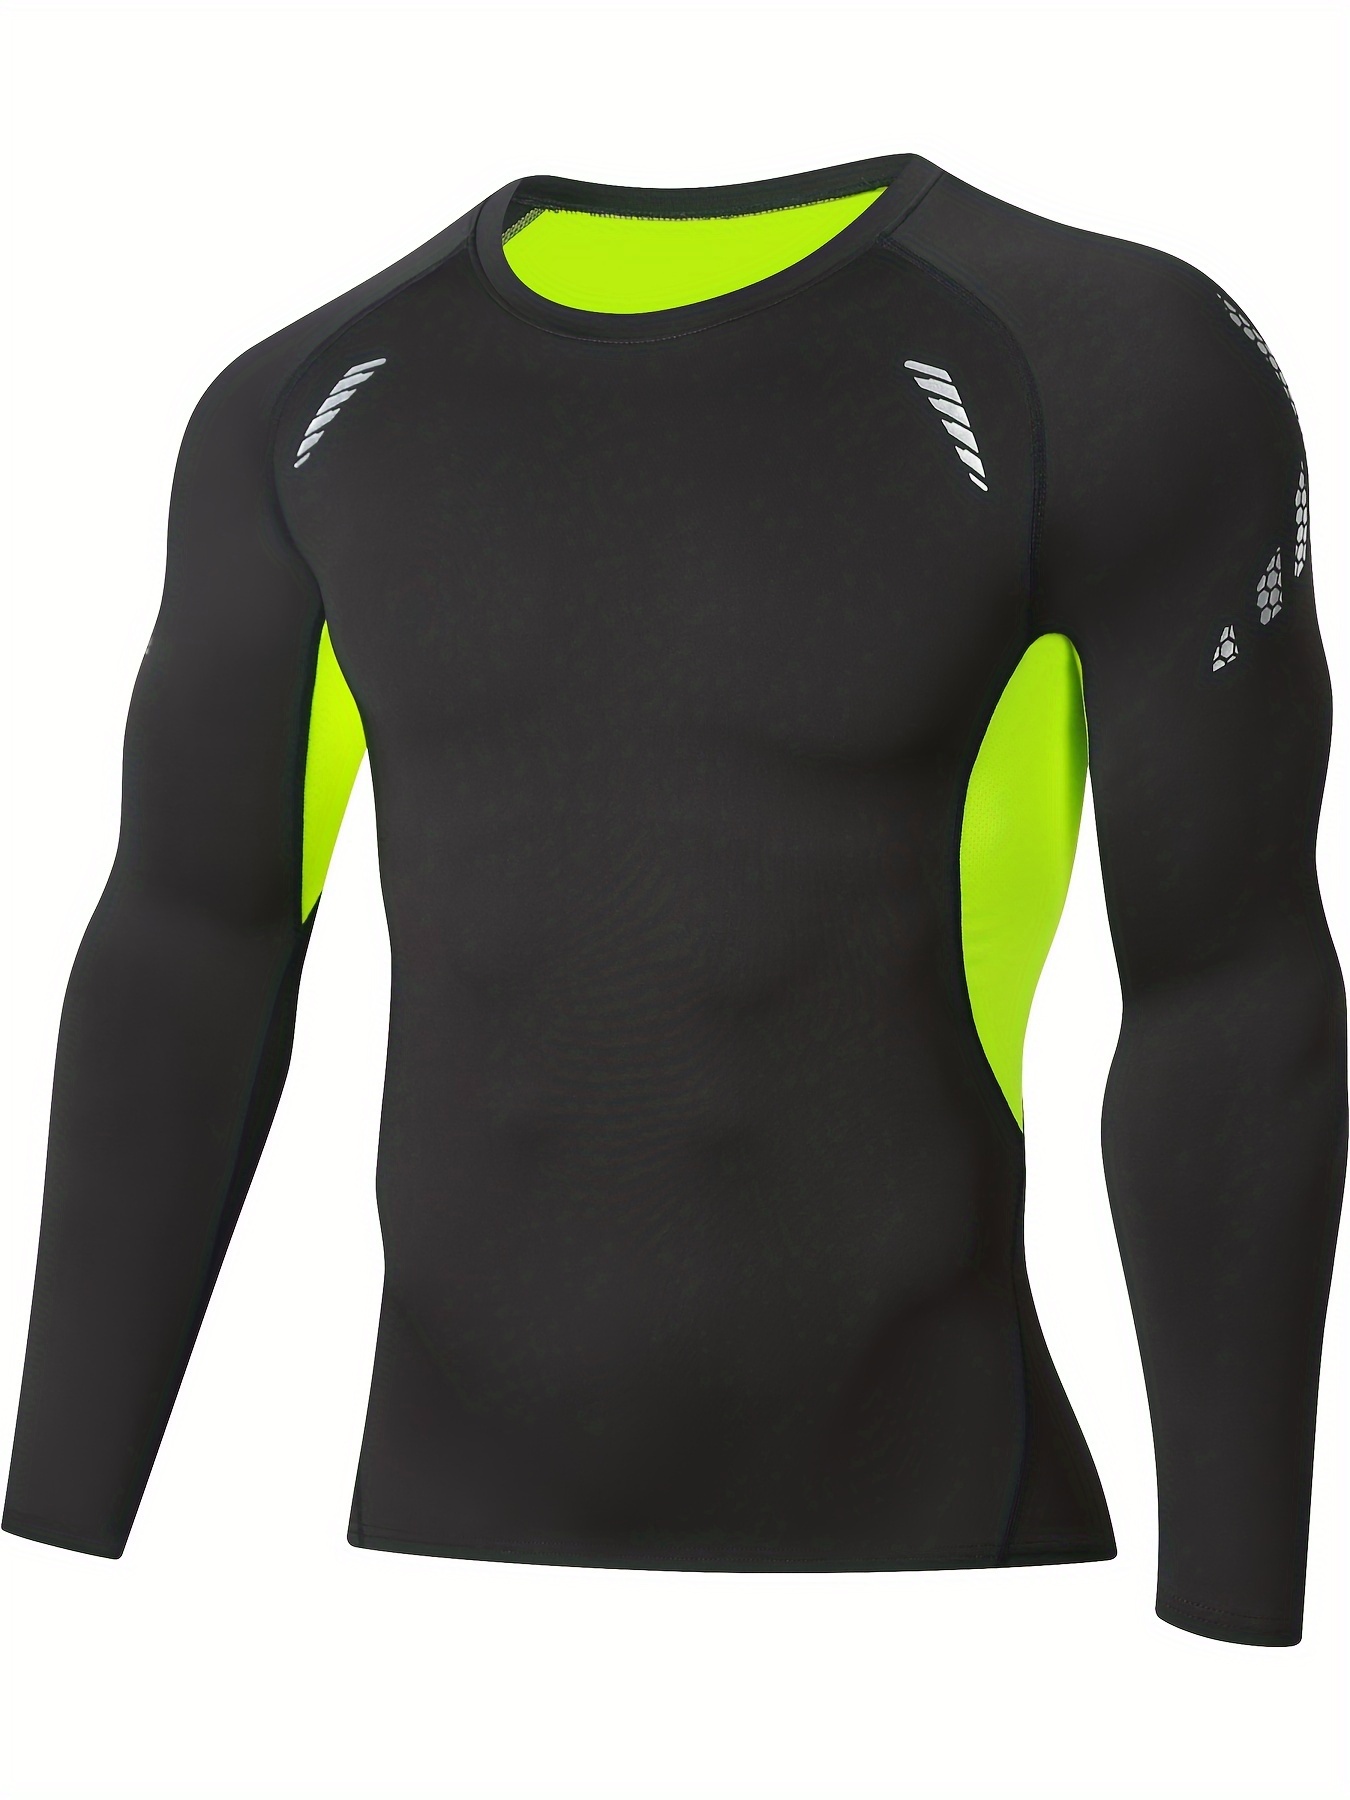 Long Sleeve Compression Shirt - Free Returns Within 90 Days